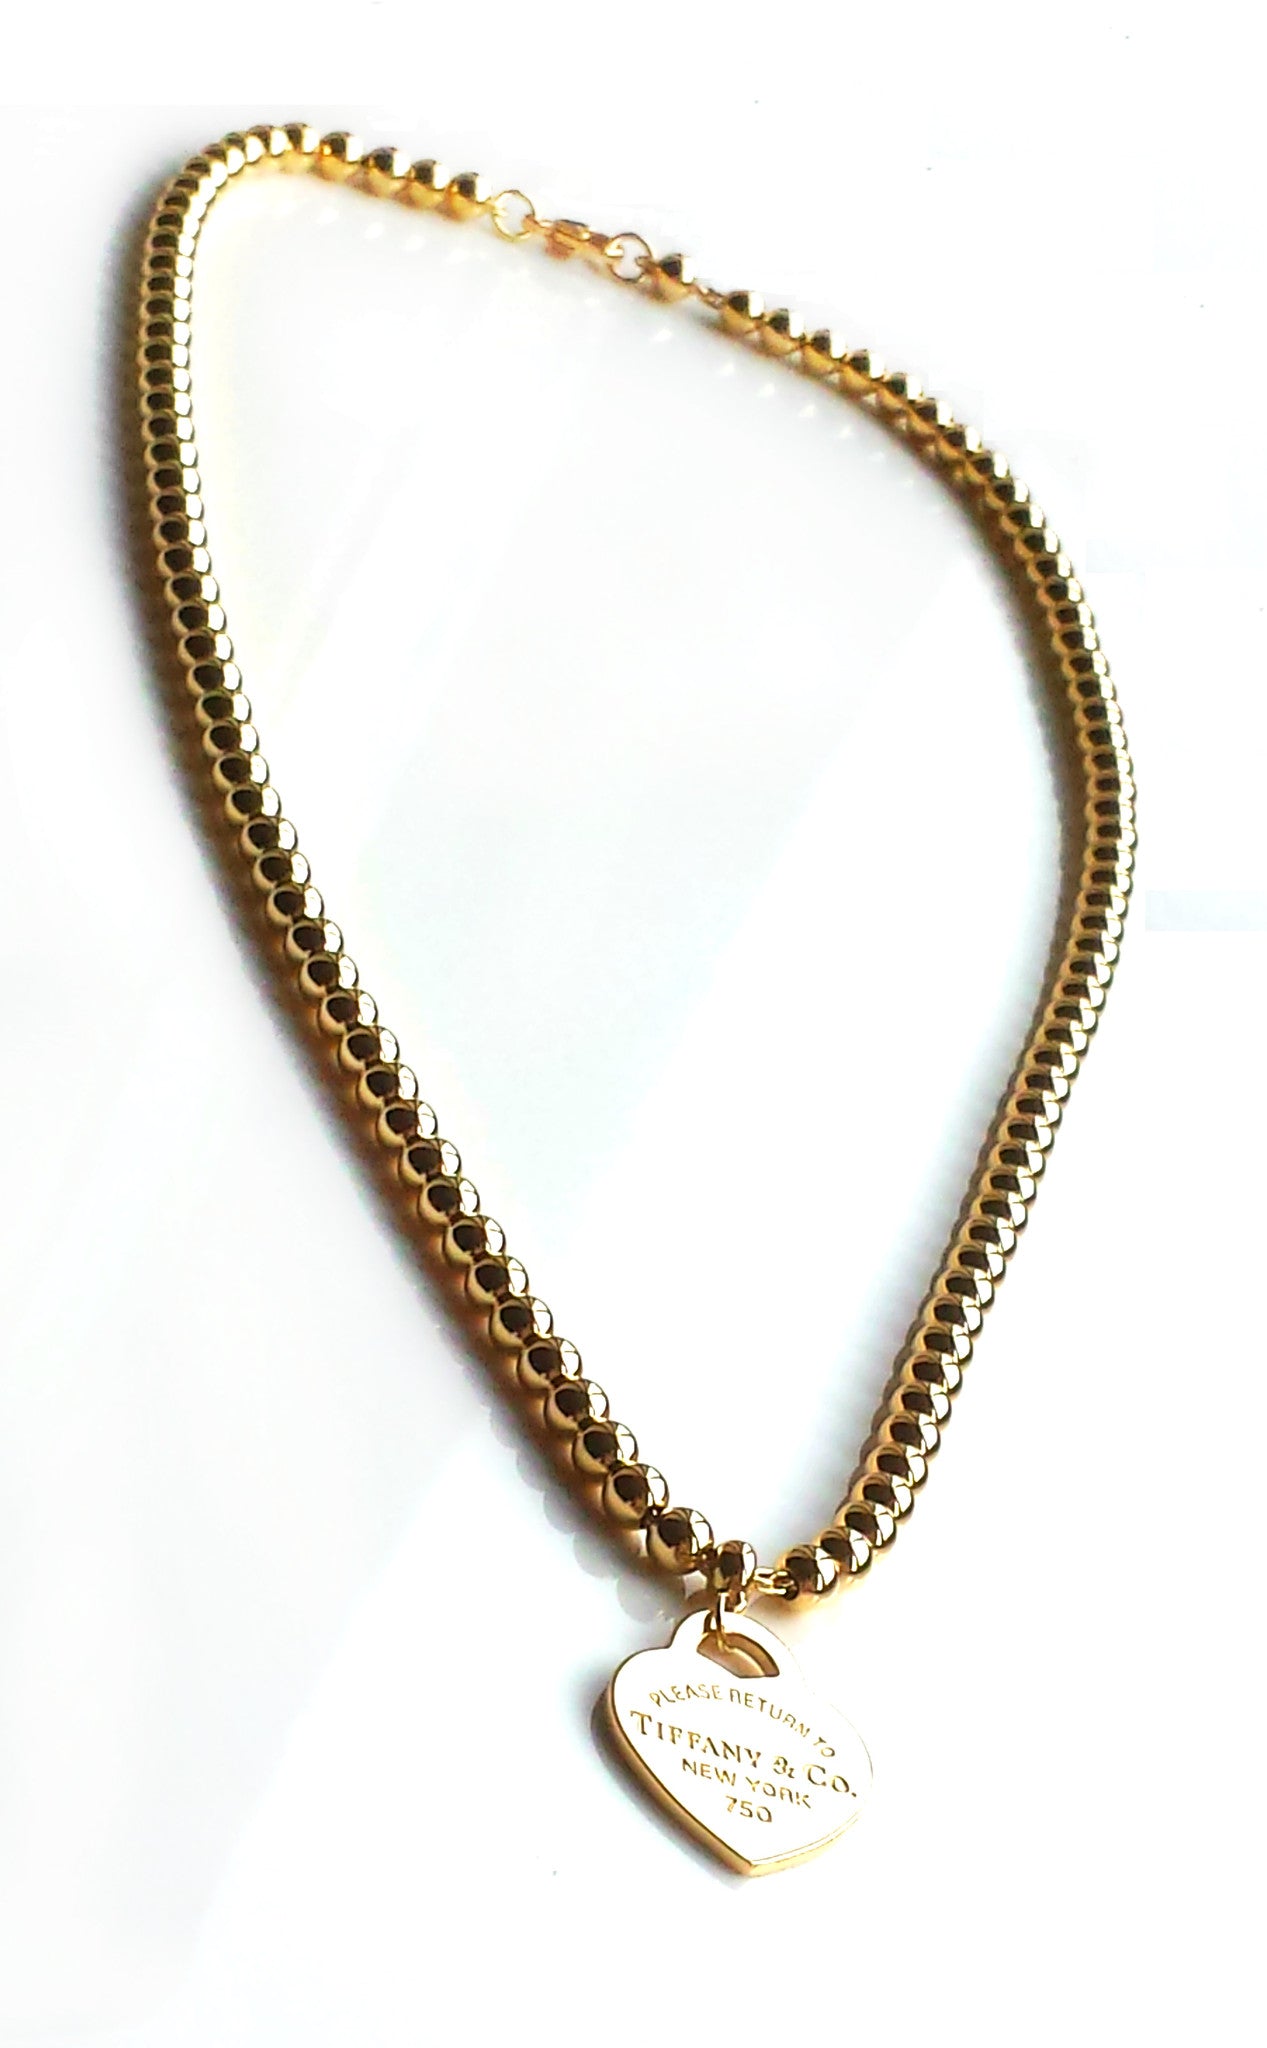 Tiffany & Co. Return to™ 18k Yellow Gold Small Bead Necklace with Heart Tag, 16 inches